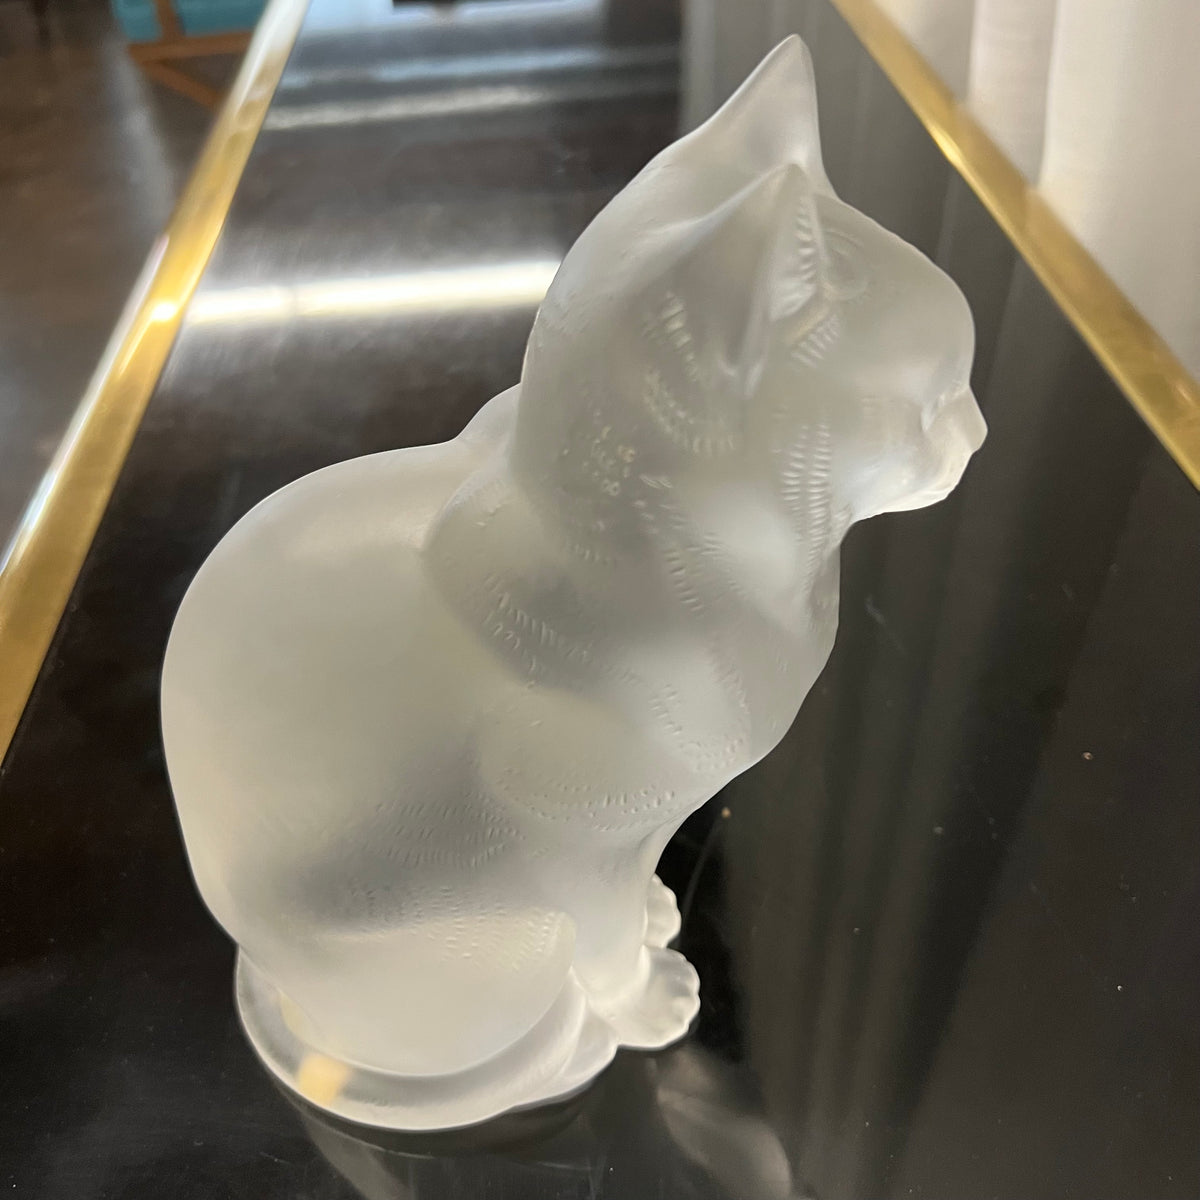 This lovely large cat sculpture by Rene Lalique. Chat Assis.  Signed Lalique cat sculpture.  Great wedding gift, gift for cat lover, Lalique signed crystal. Studio Sonja Milan, Chicago, IL